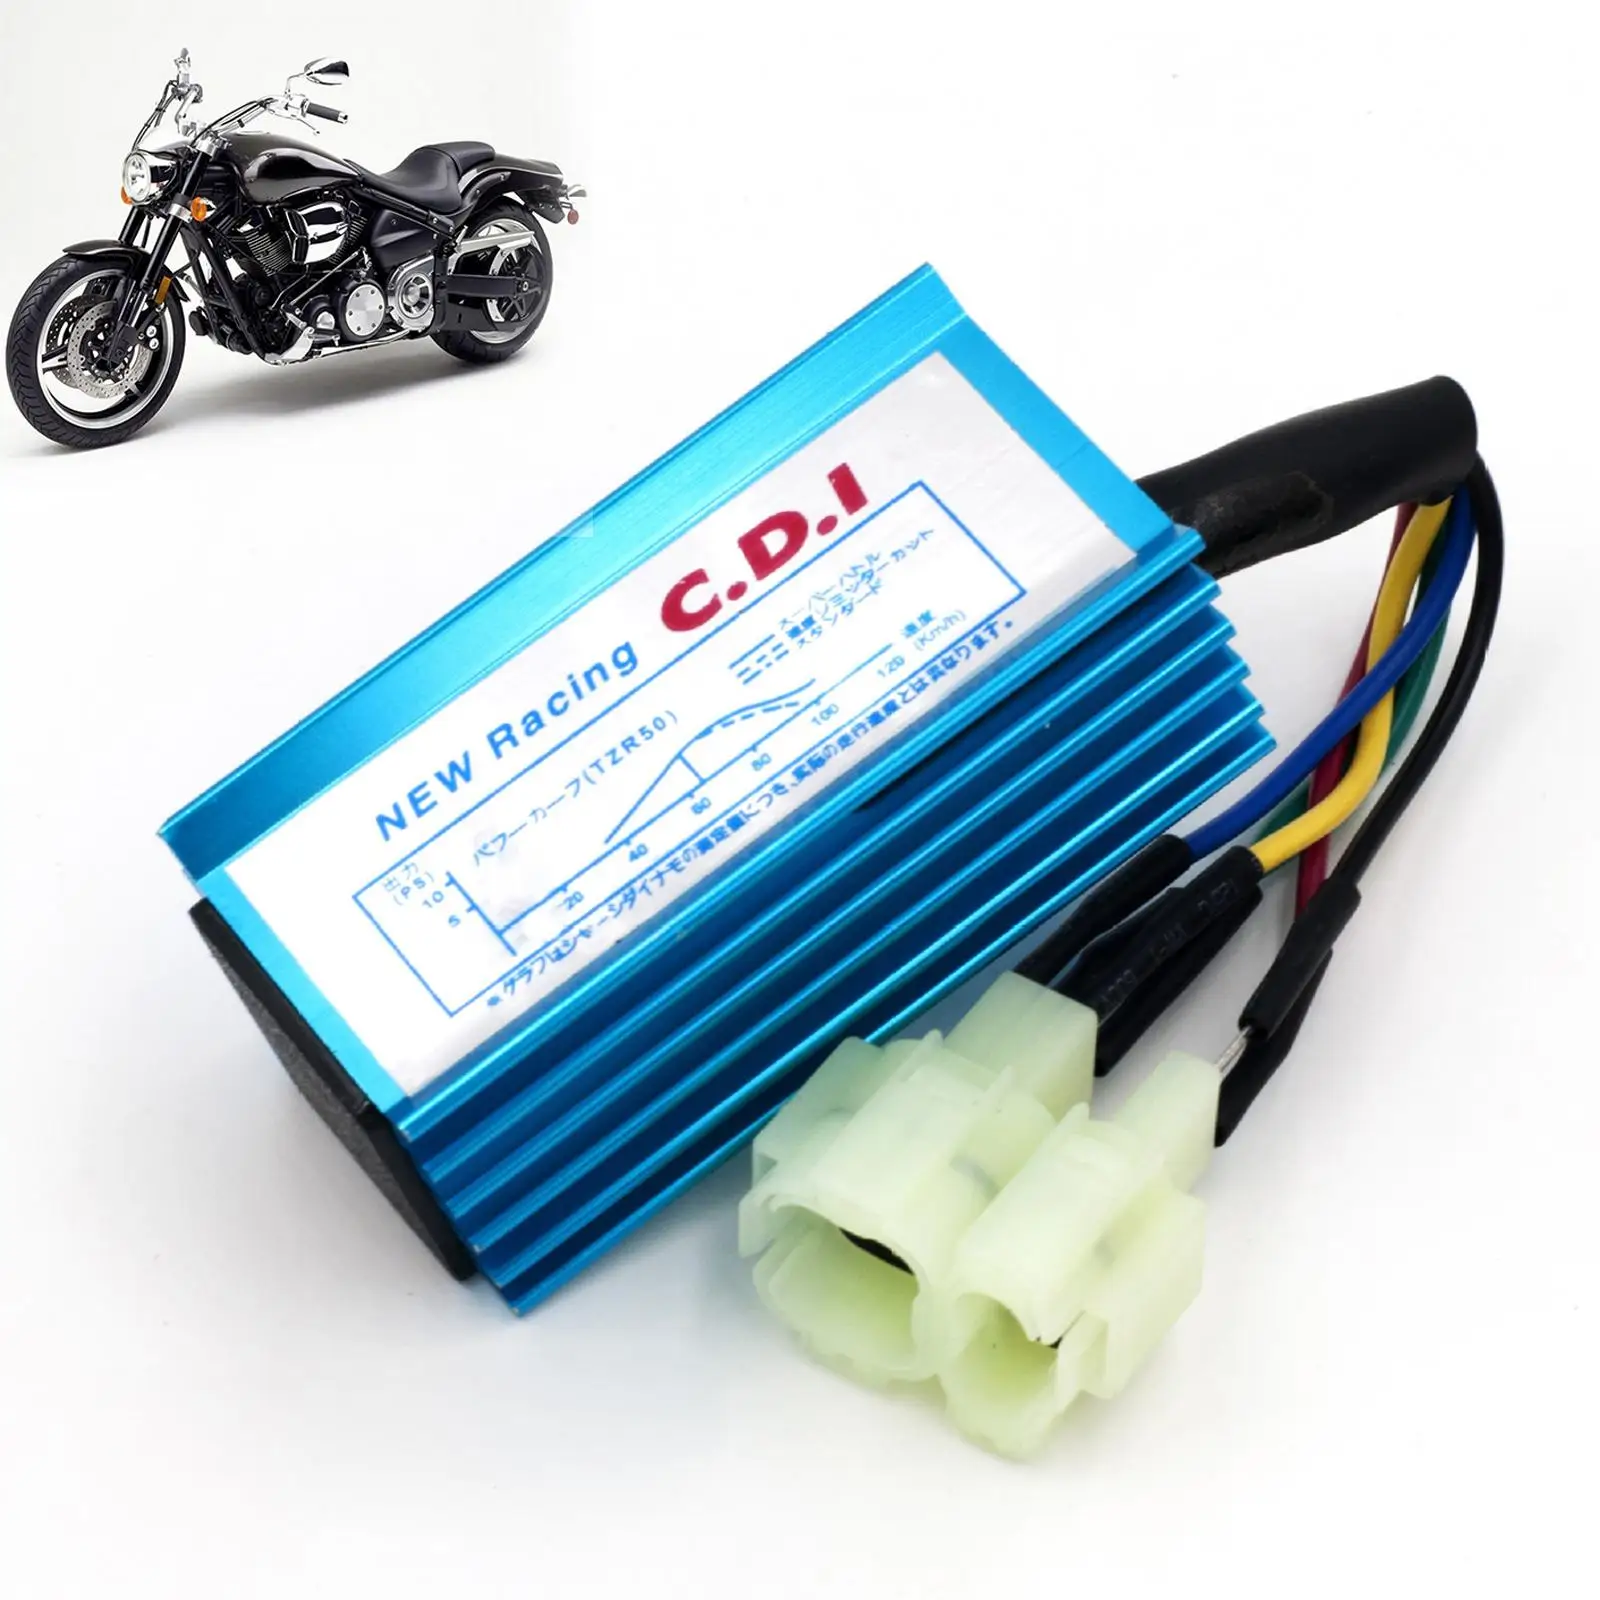 6Pins Gy6  Cdi Box Aluminum Alloy  Performance for Gy6 50cc-250cc Series Engines Locomotives Motorbikes Motorcycle Bike